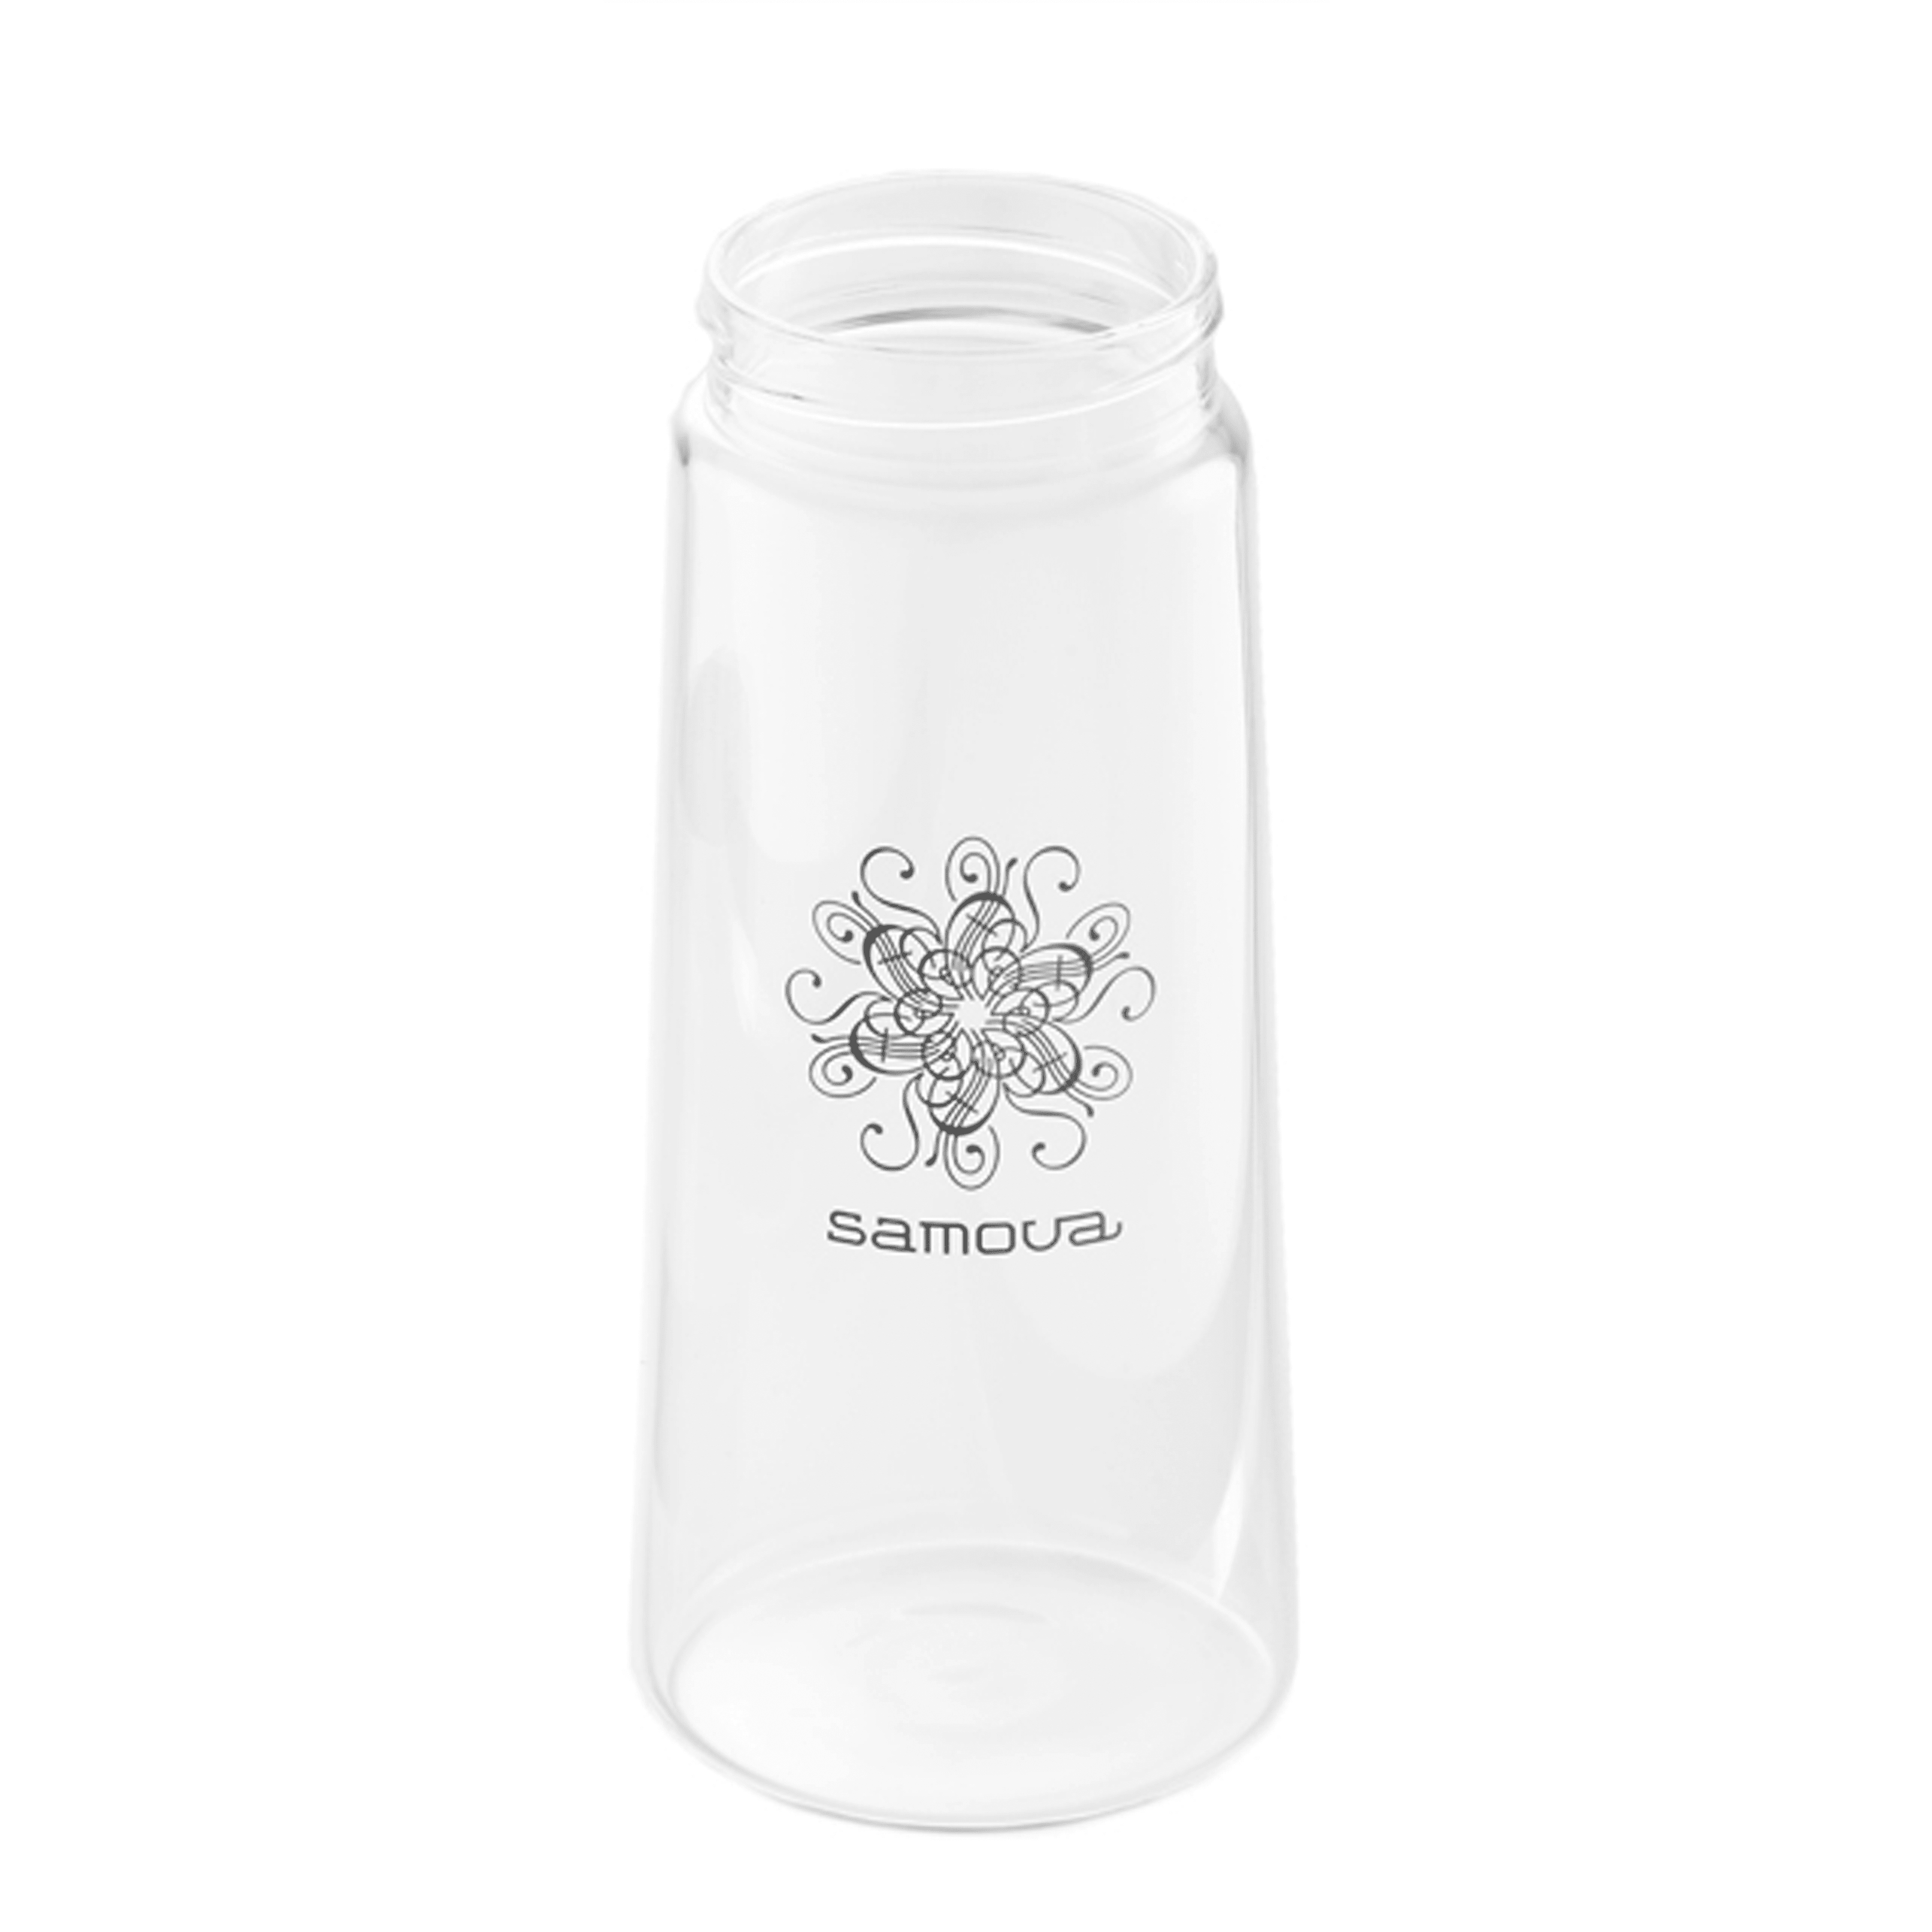 Tea-Jay replacement glass